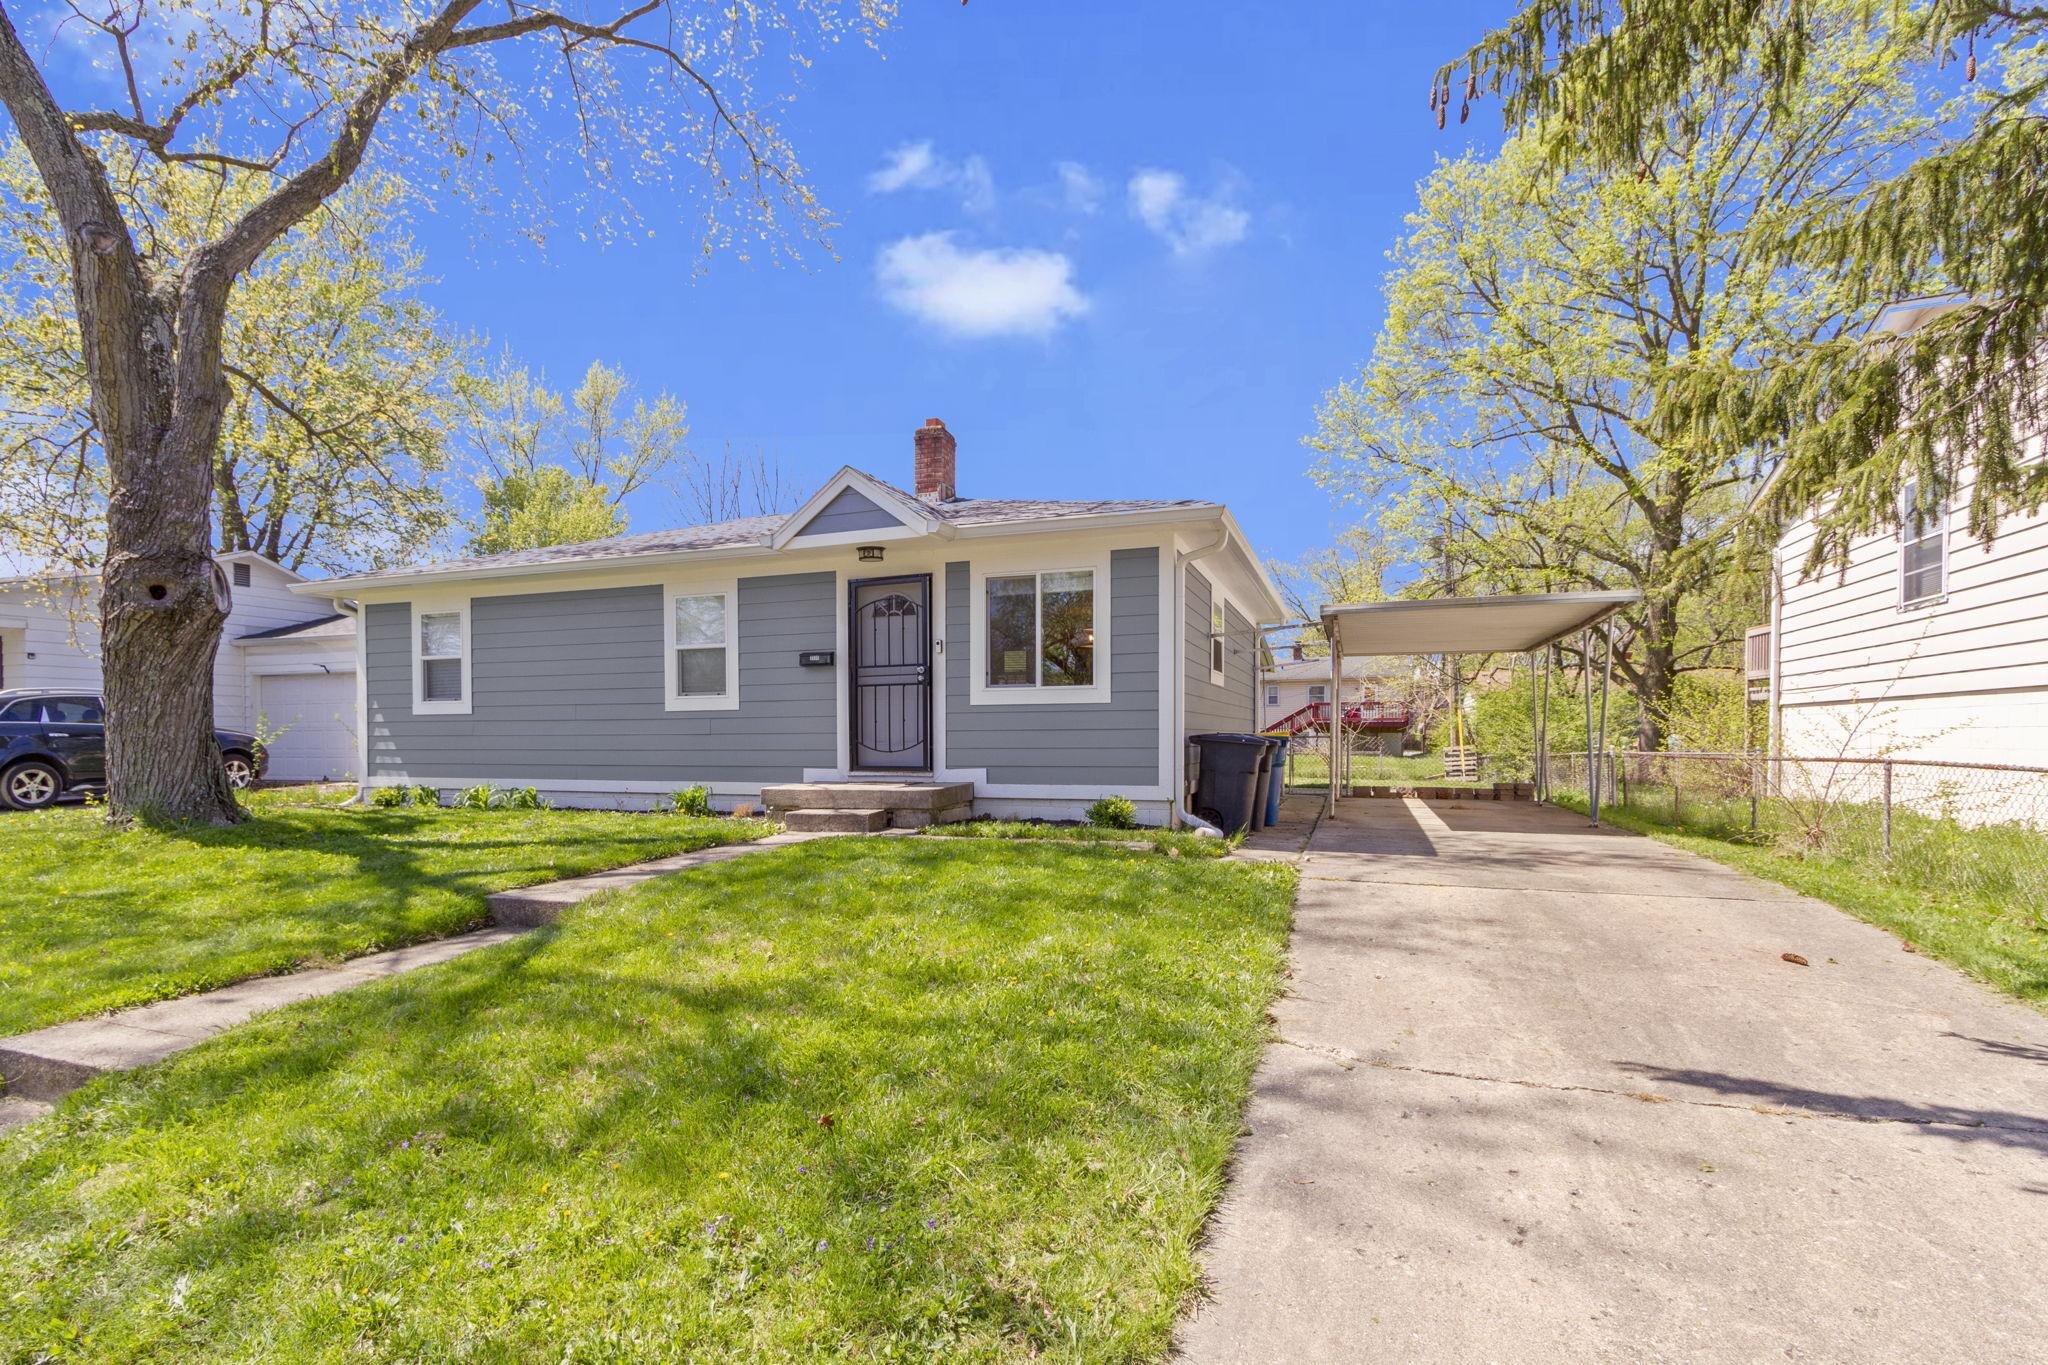 Photo one of 3538 Cecil Ave Indianapolis IN 46226 | MLS 21965309